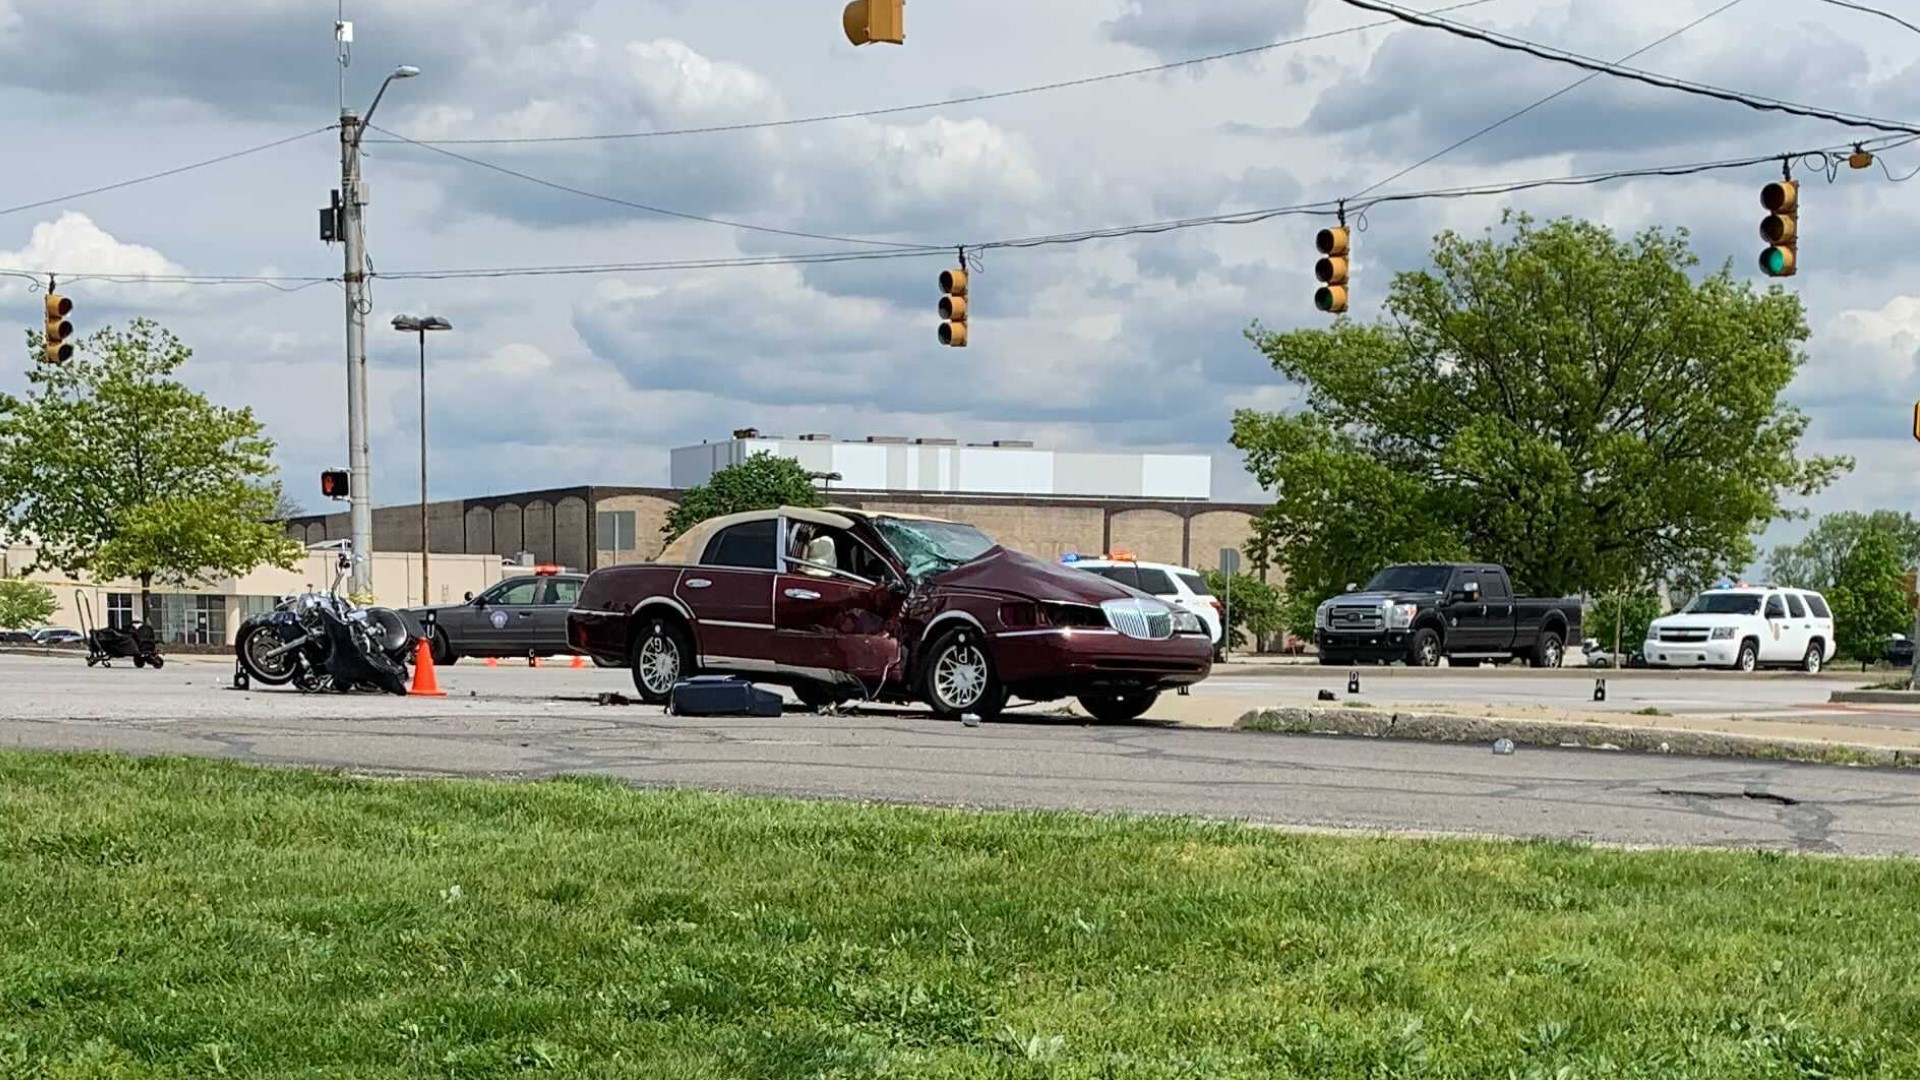 A man is dead after a motorcycle crash Monday afternoon.